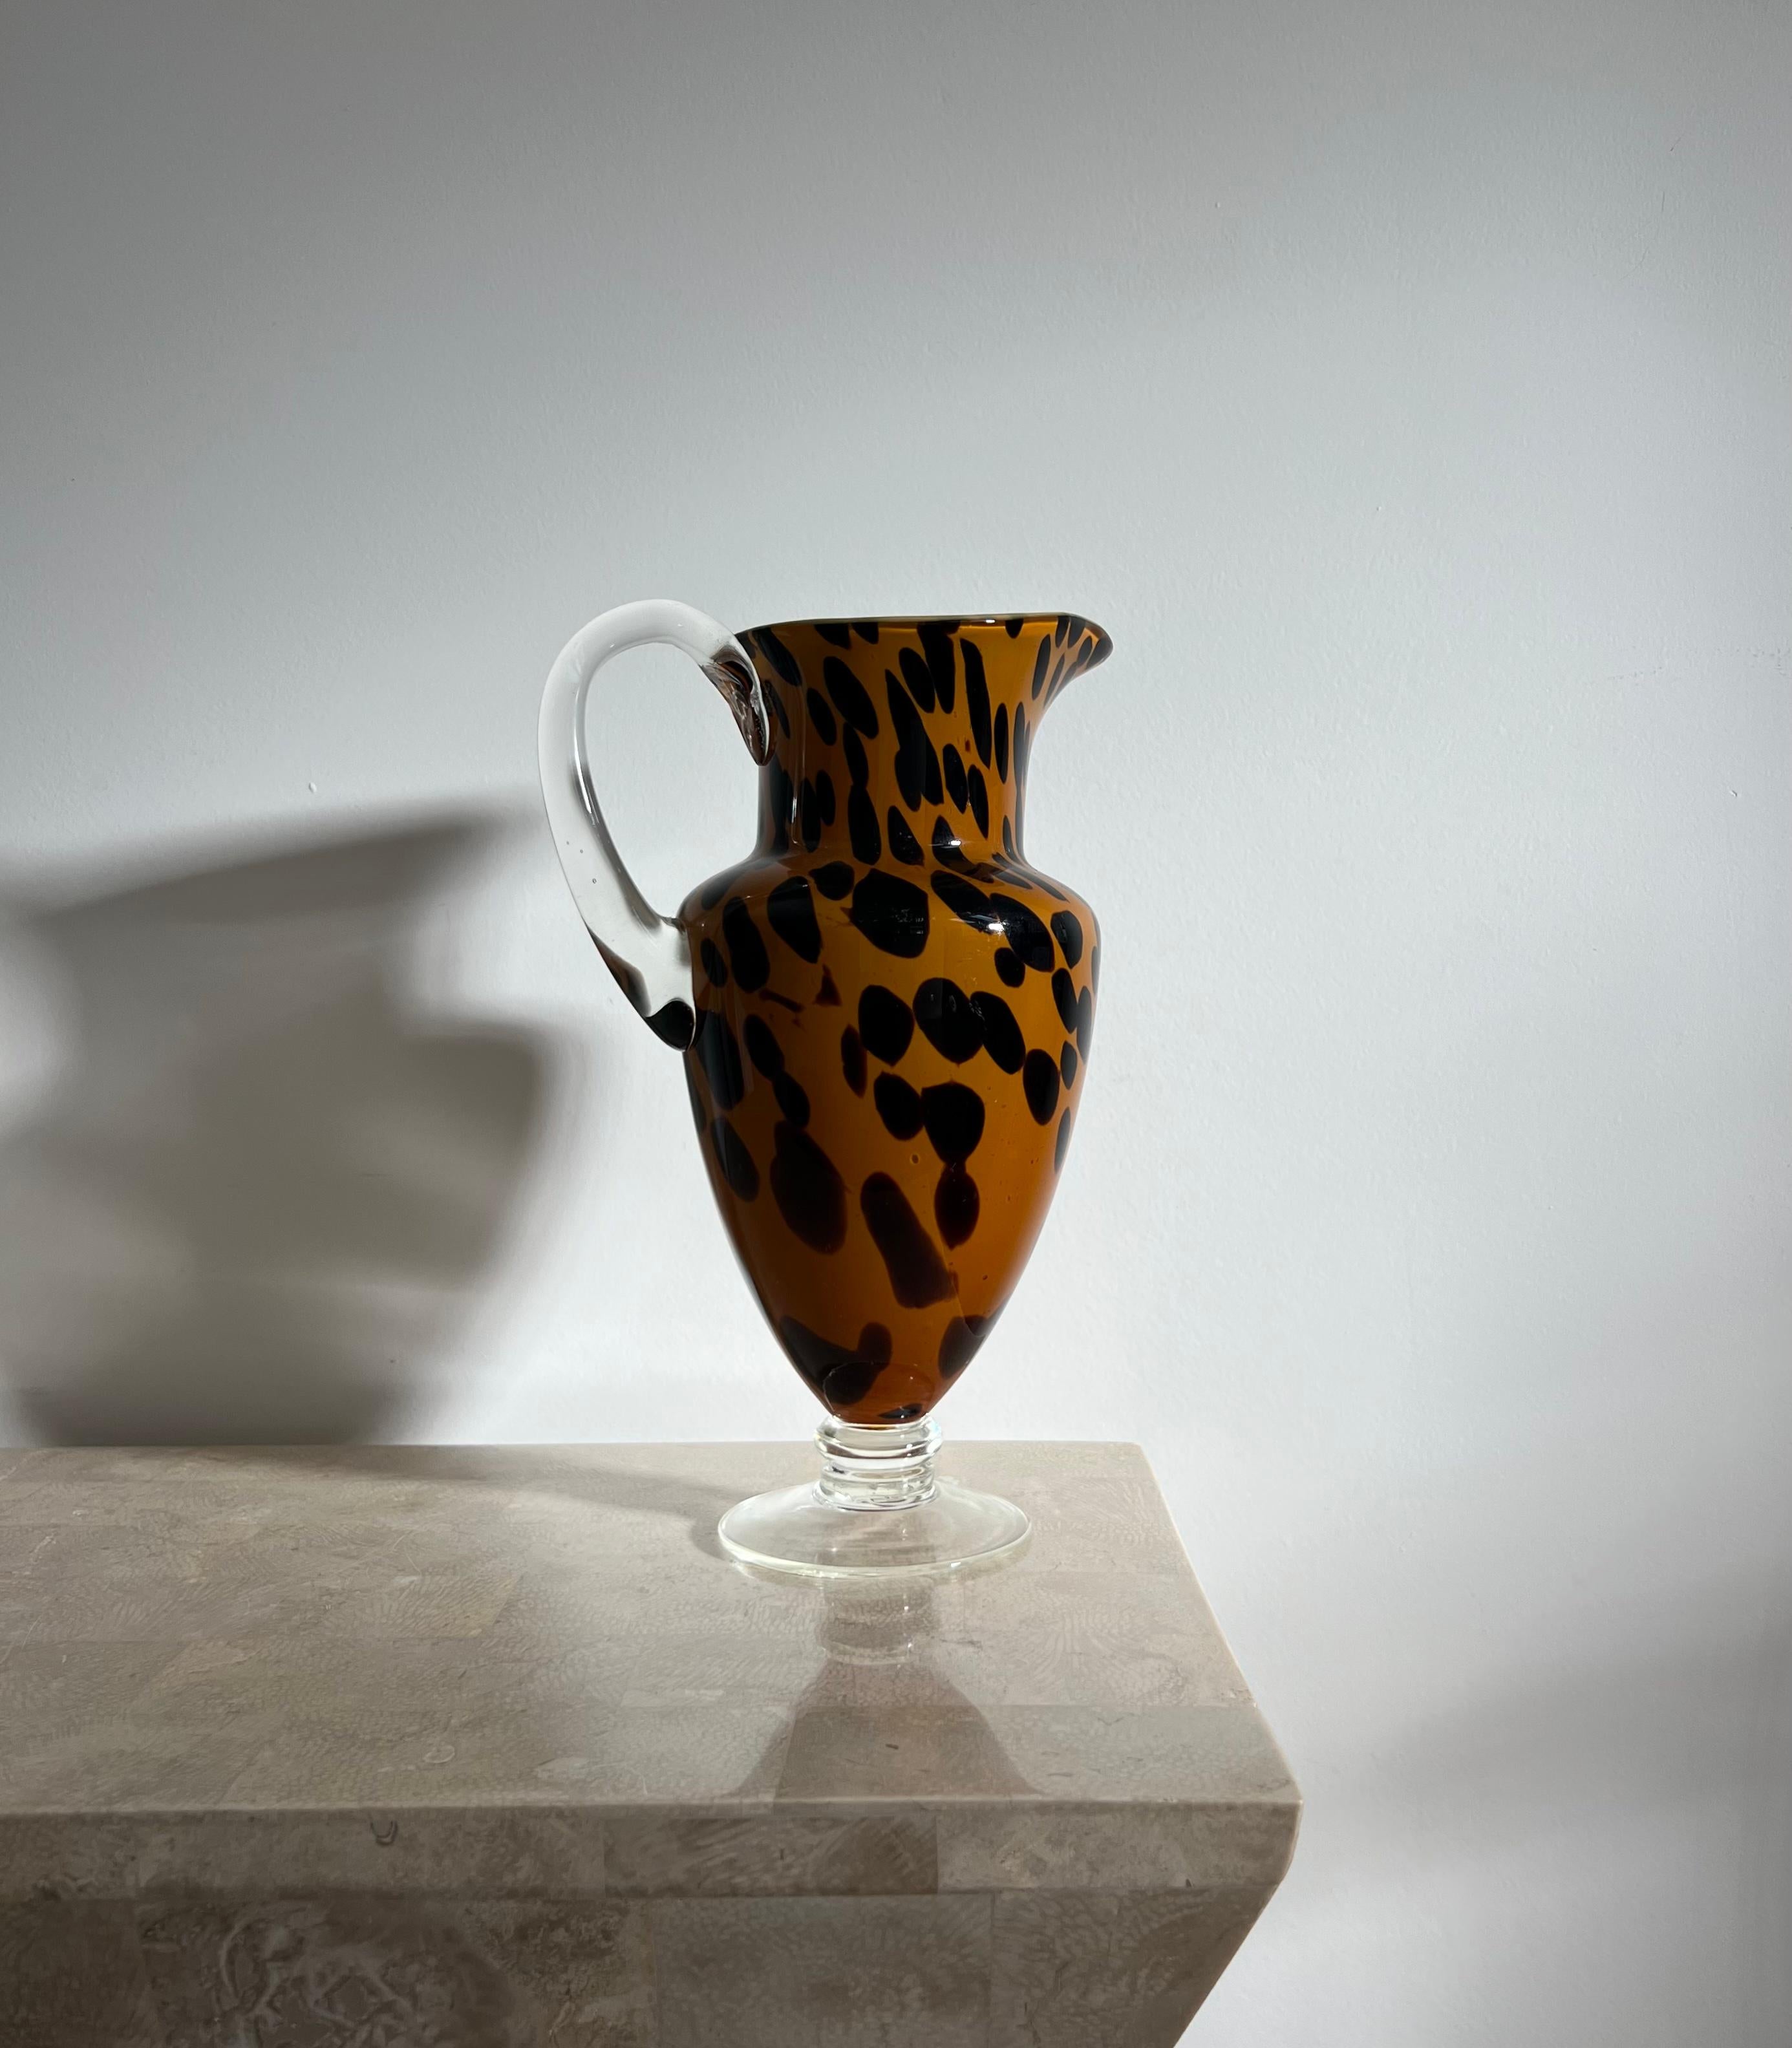 A rare Murano style art glass pitcher, Italy 1990s. Tones of saffron and espresso; motif is not totally dissimilar to leopard print. Base and handle are thick transparent glass. Minor signs of age consistent with use but no outward or glaring flaws;